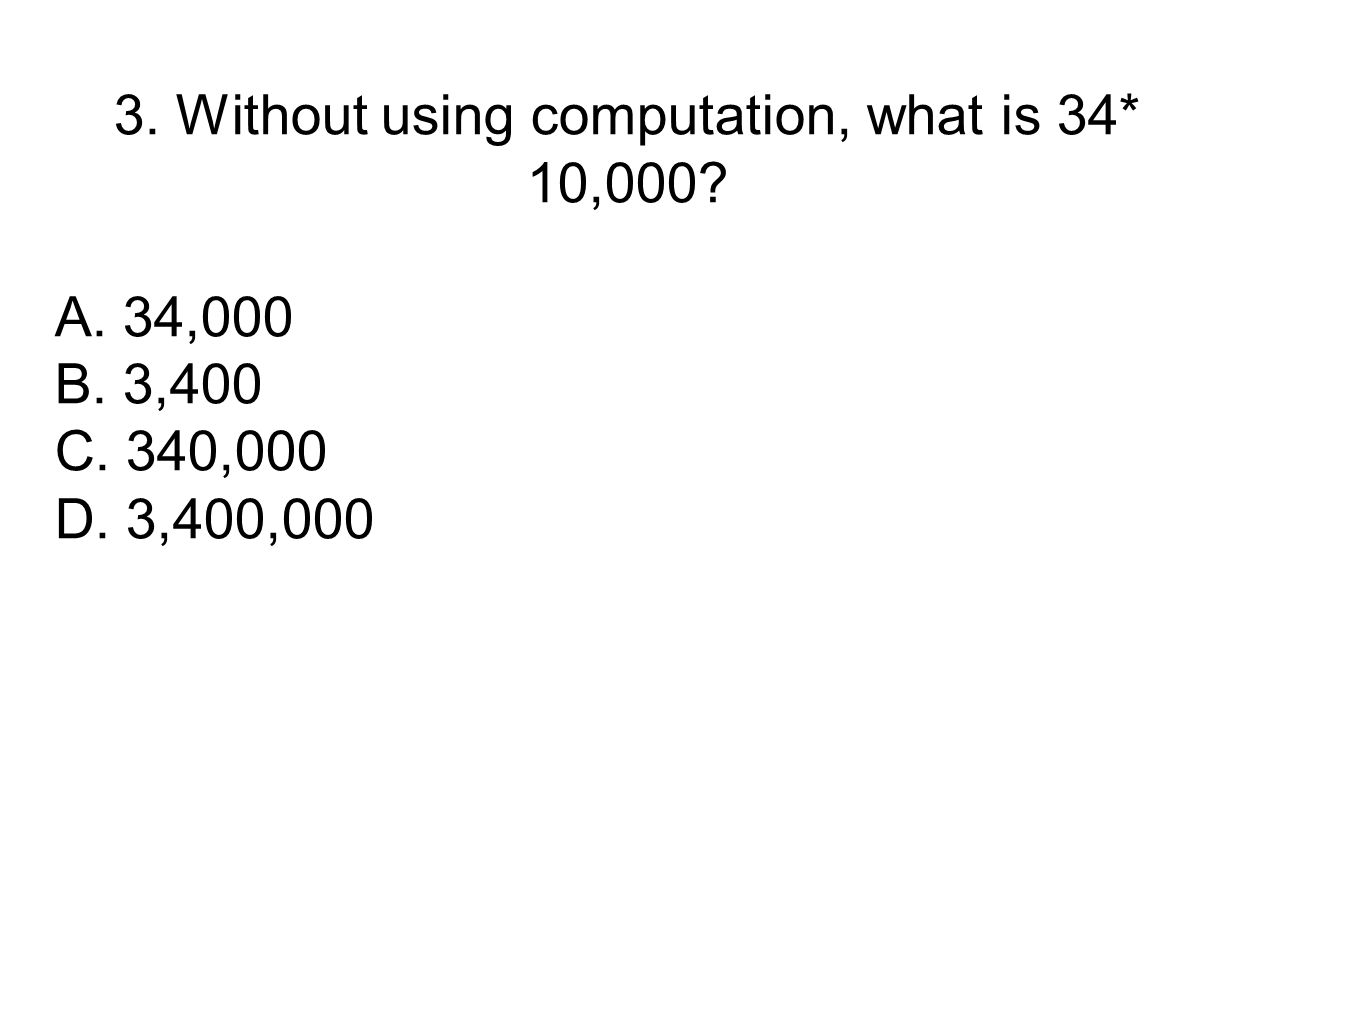 3. Without using computation, what is 34* 10,000 A. 34,000 B. 3,400 C. 340,000 D. 3,400,000